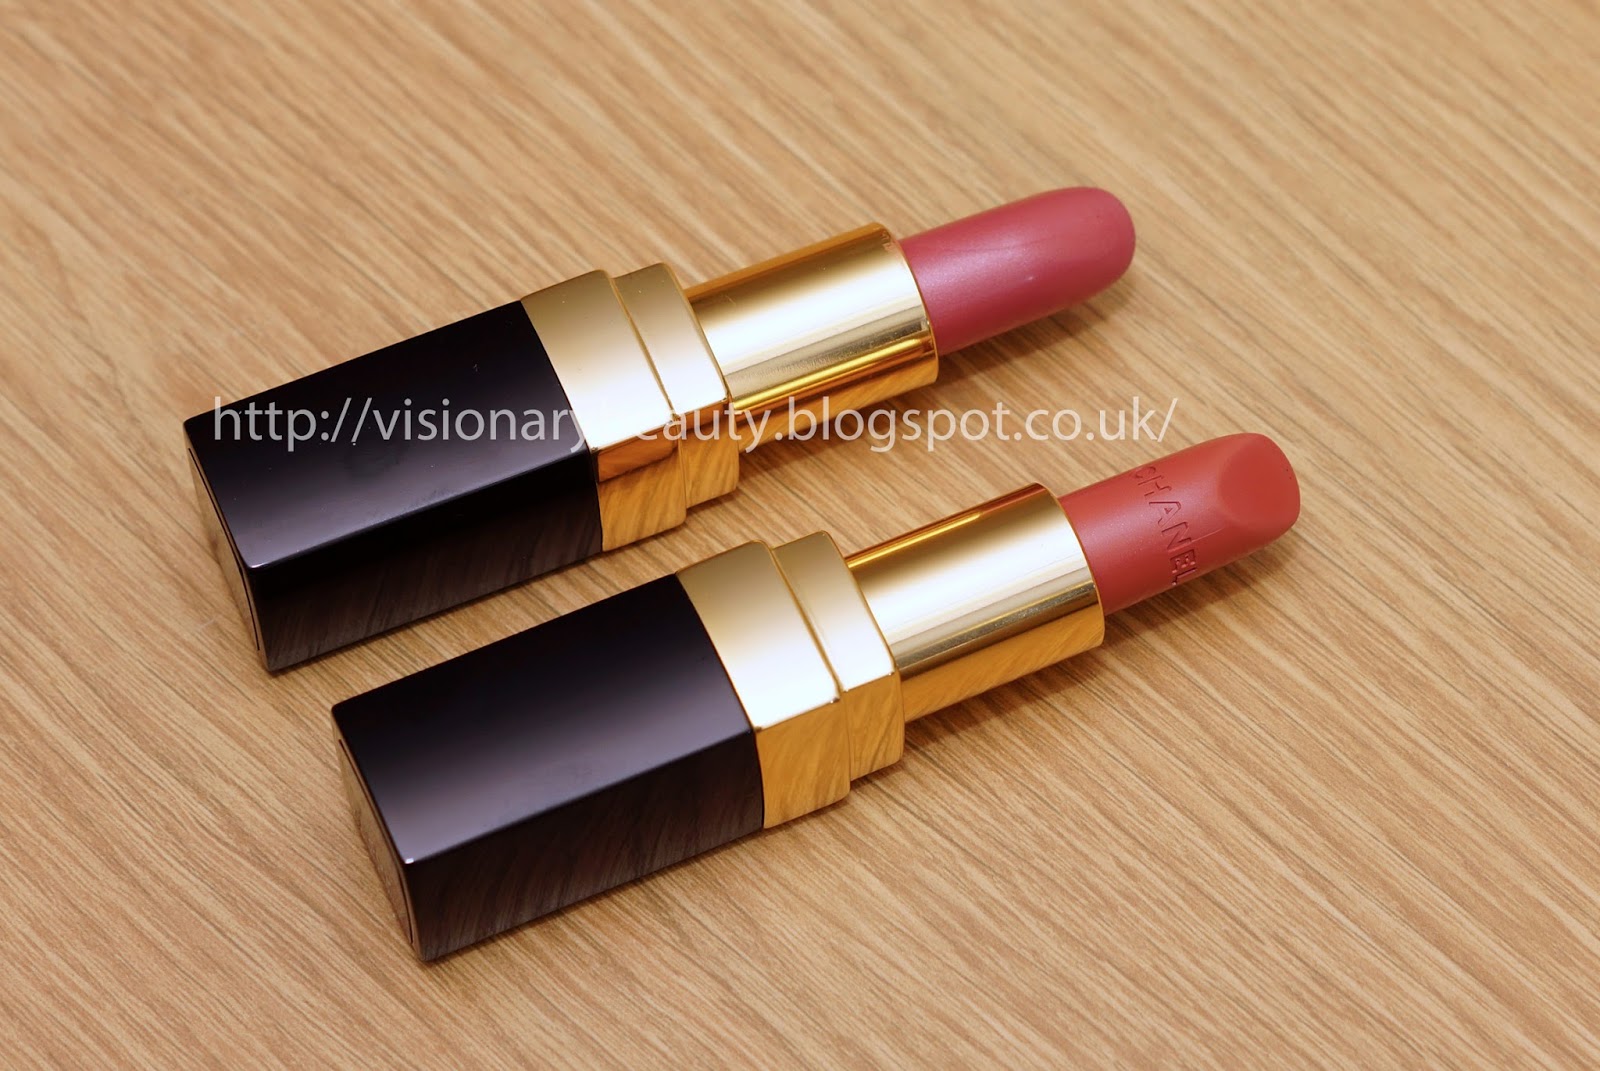 Chanel Rouge Coco Lipstick Relaunch, Swatches of All The Shades, Spring 2015